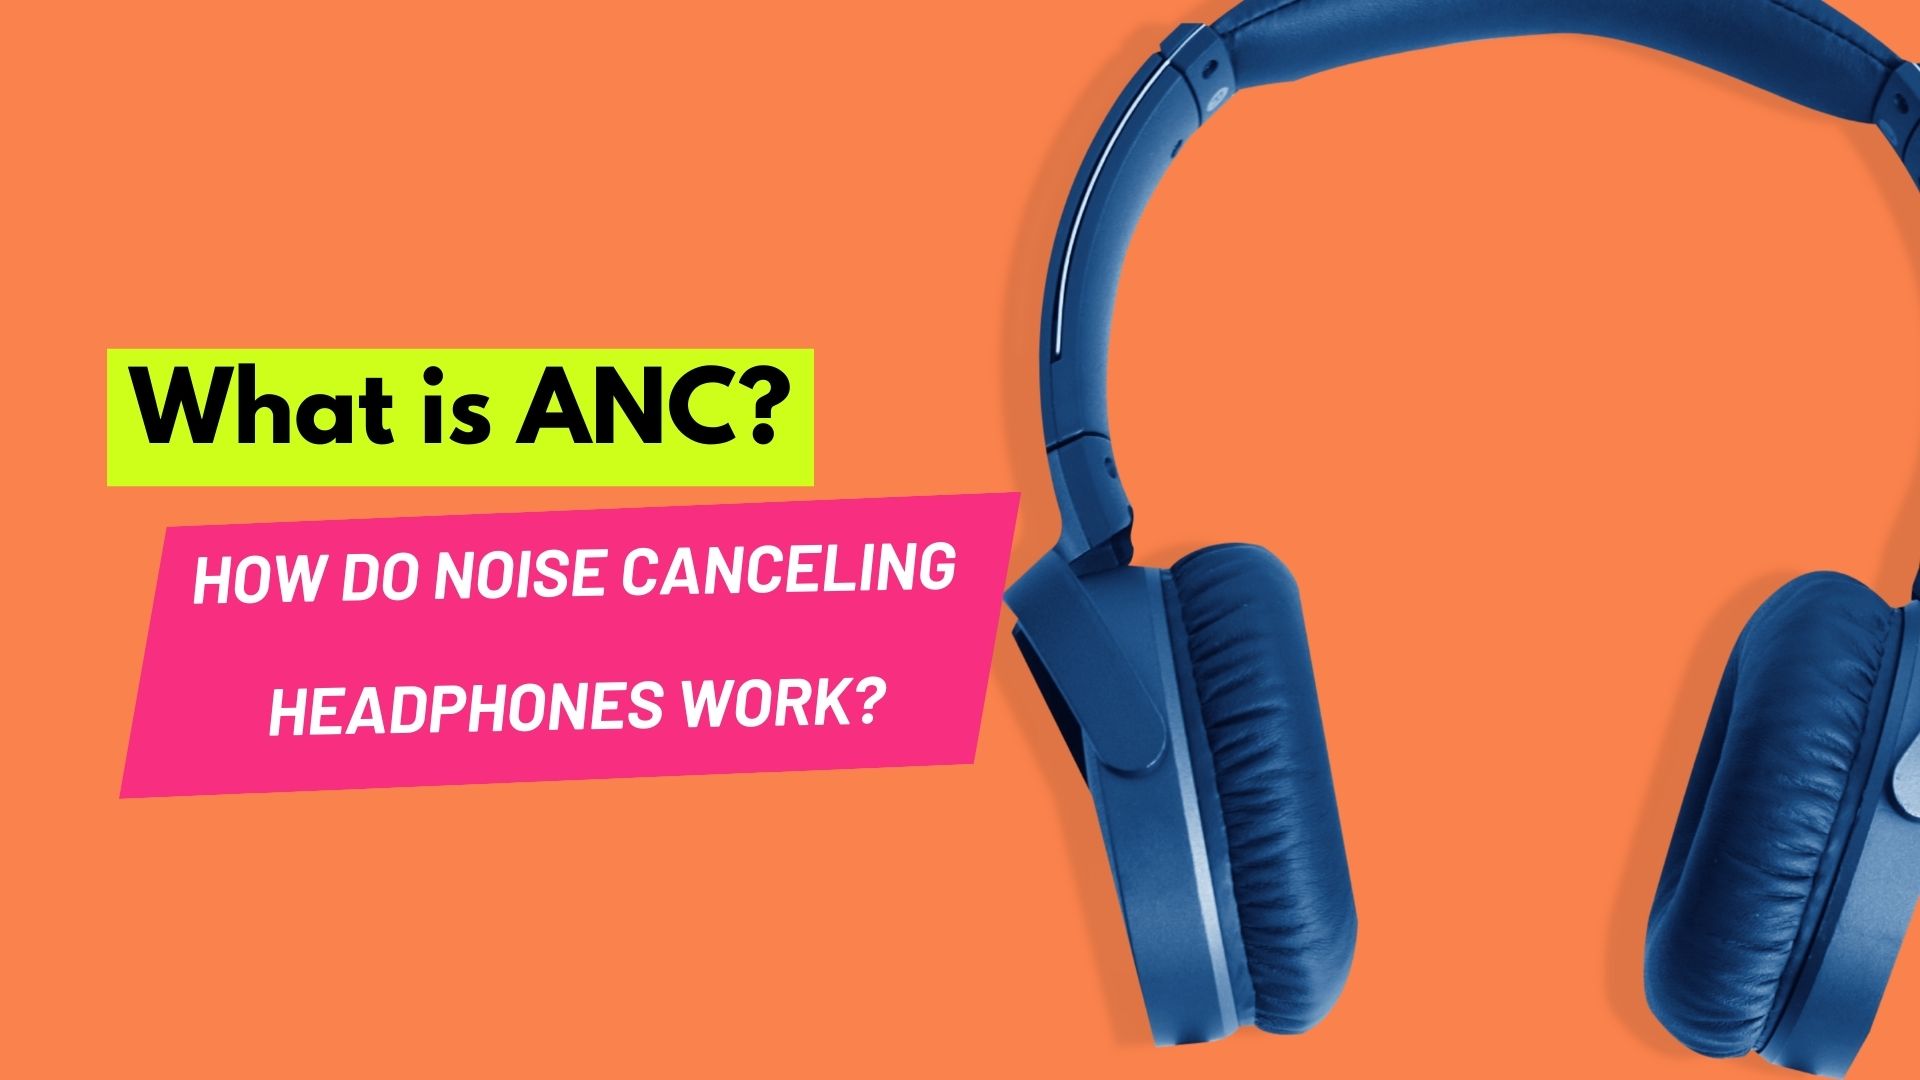 What is ANC and How Do Noise Canceling Headphones Work?